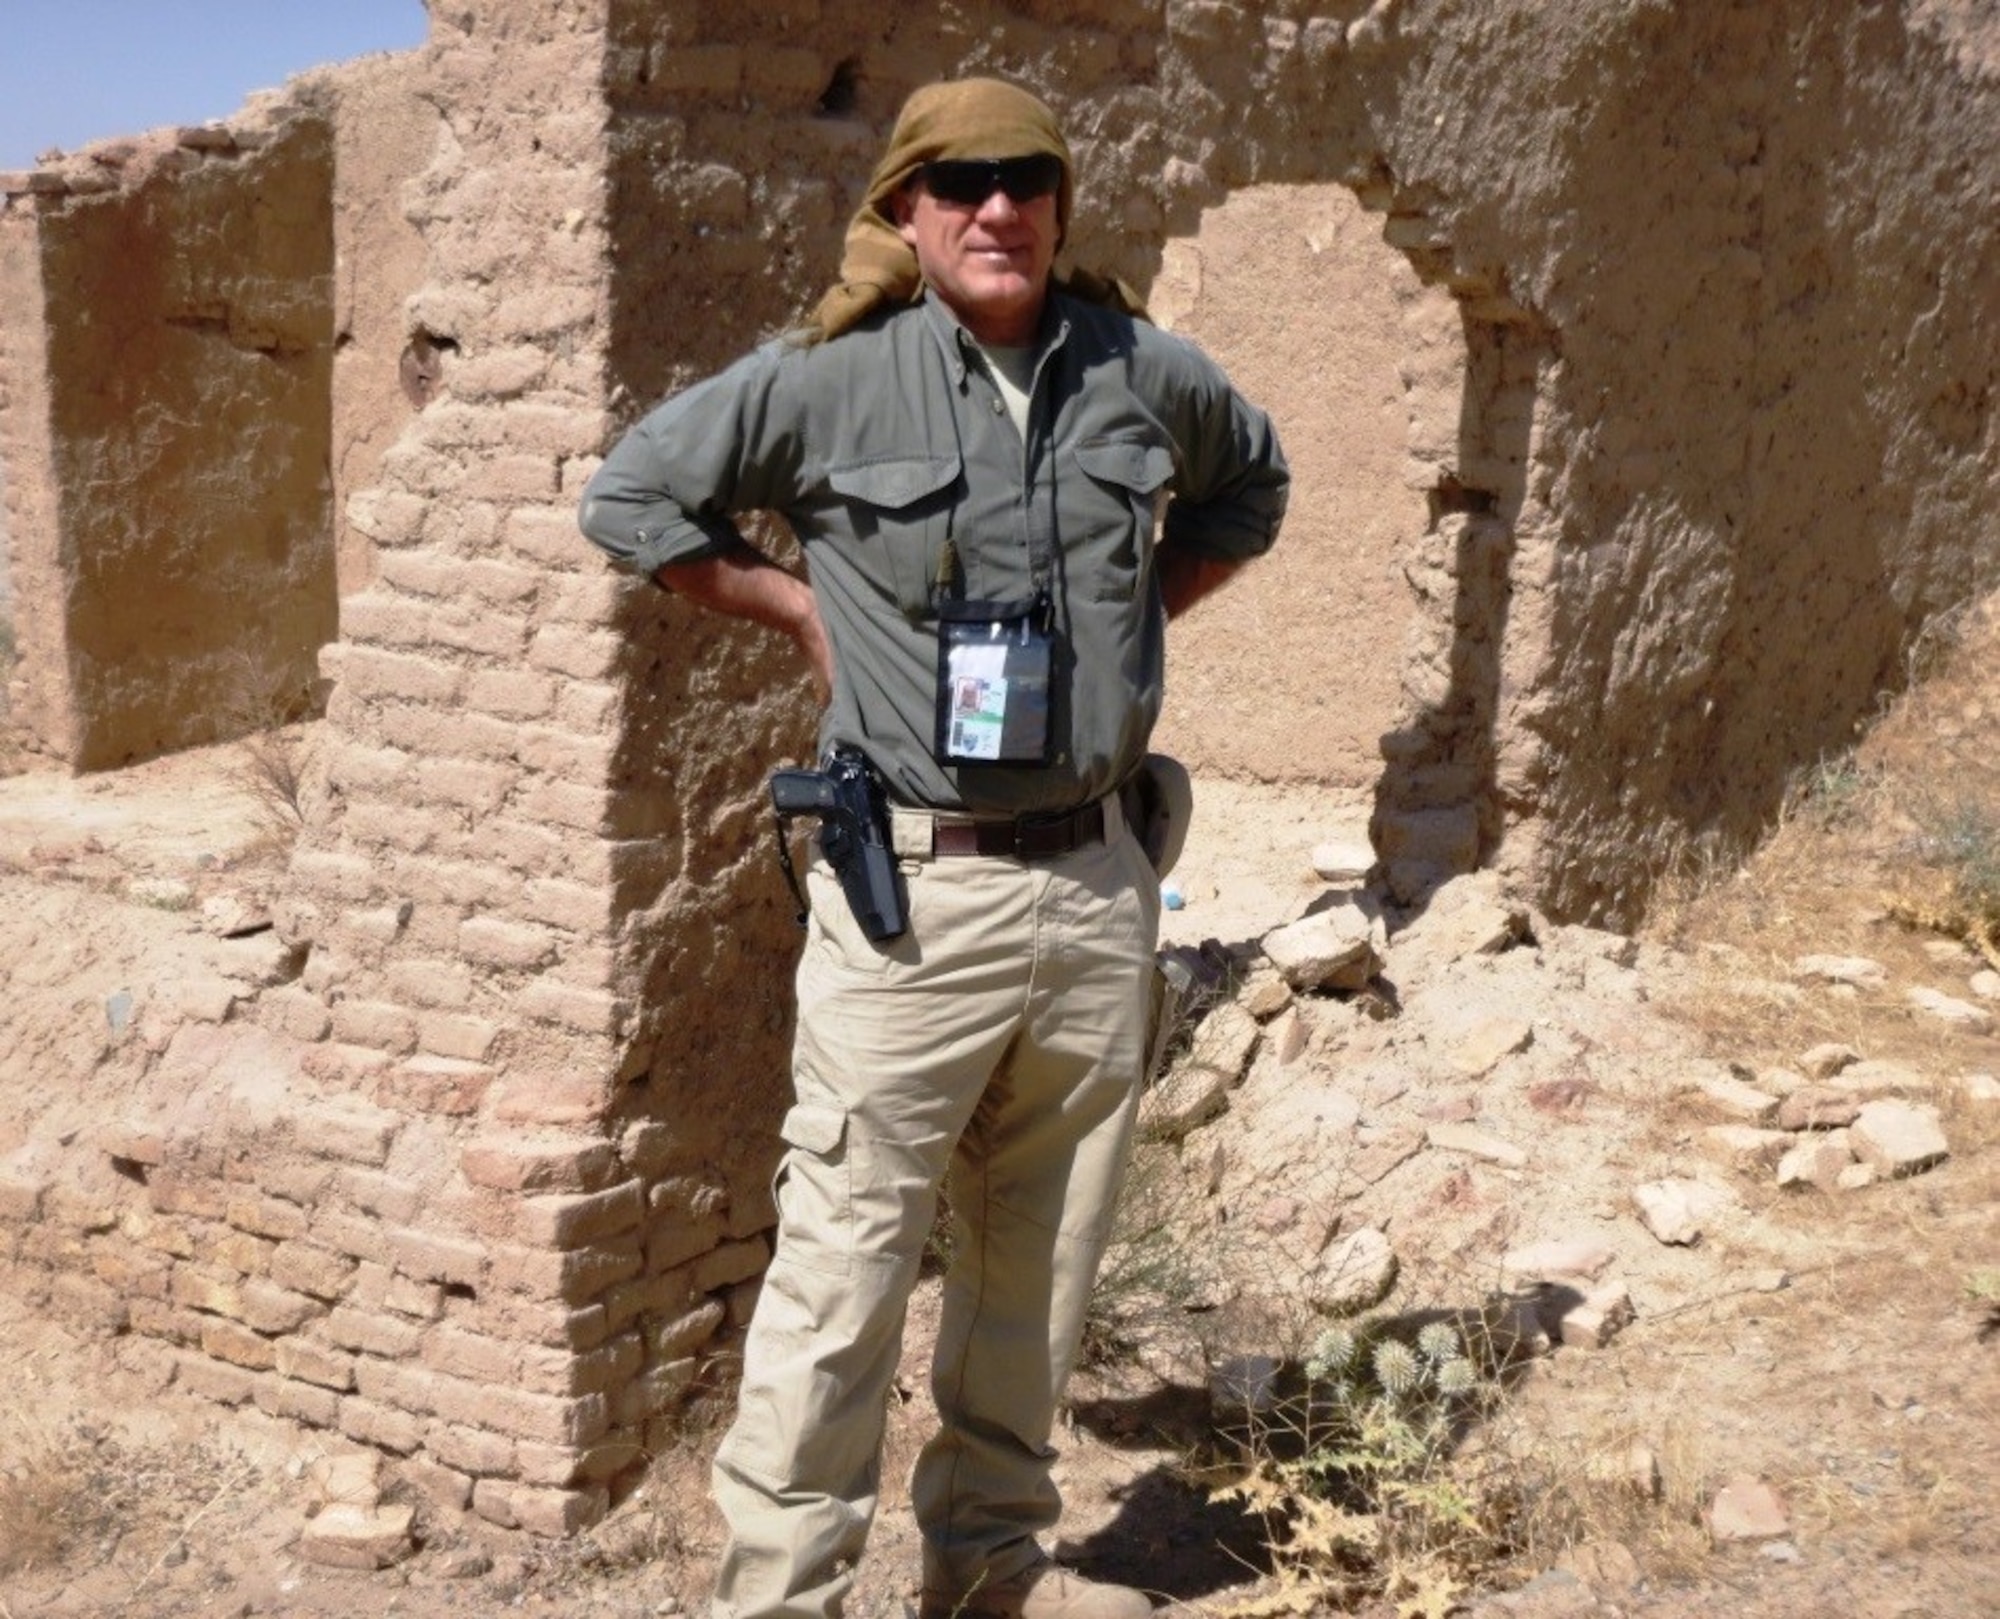 Greg Gangnuss, a civil engineer who worked as a senior environmental adviser to the Afghan Ministry of Defense, is shown in the field during his March 2015 to April 2016 deployment to Afghanistan. (Courtesy Photo)